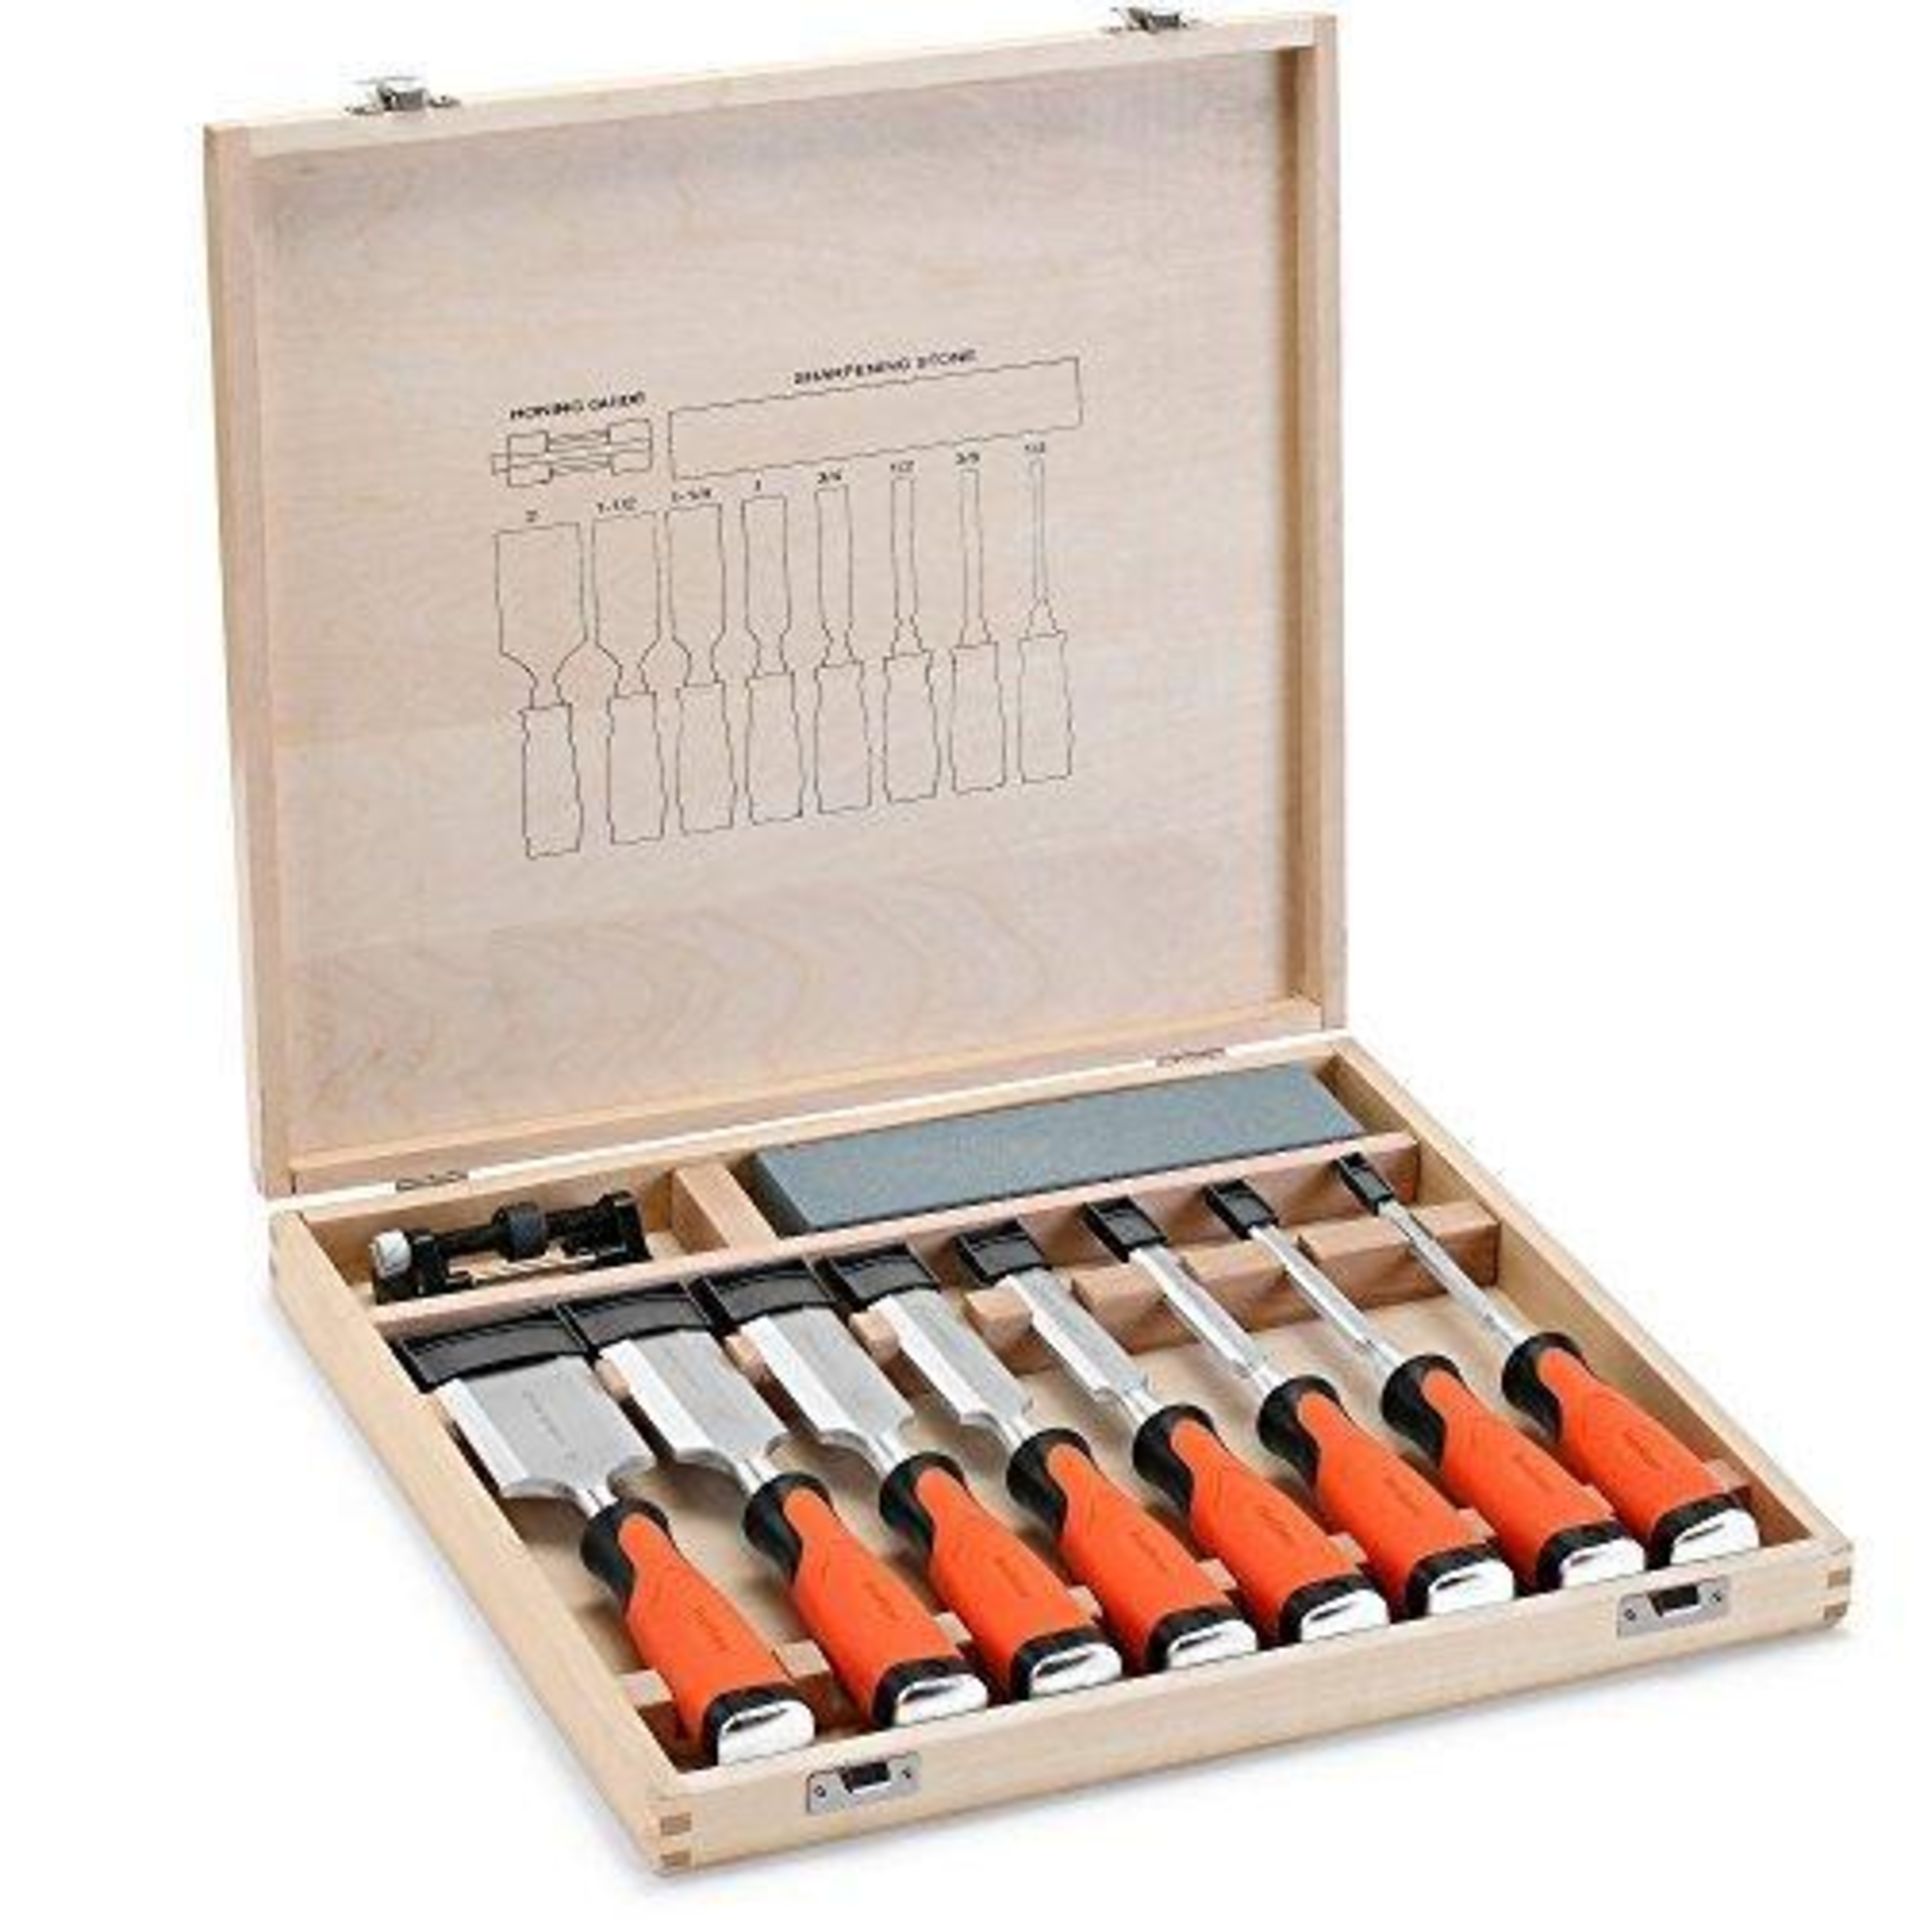 10pc Wood Chisel Set - ER51.Luxury 10pc Wood Chisel SetThis Luxury Chisel Set is just the job for - Image 5 of 5